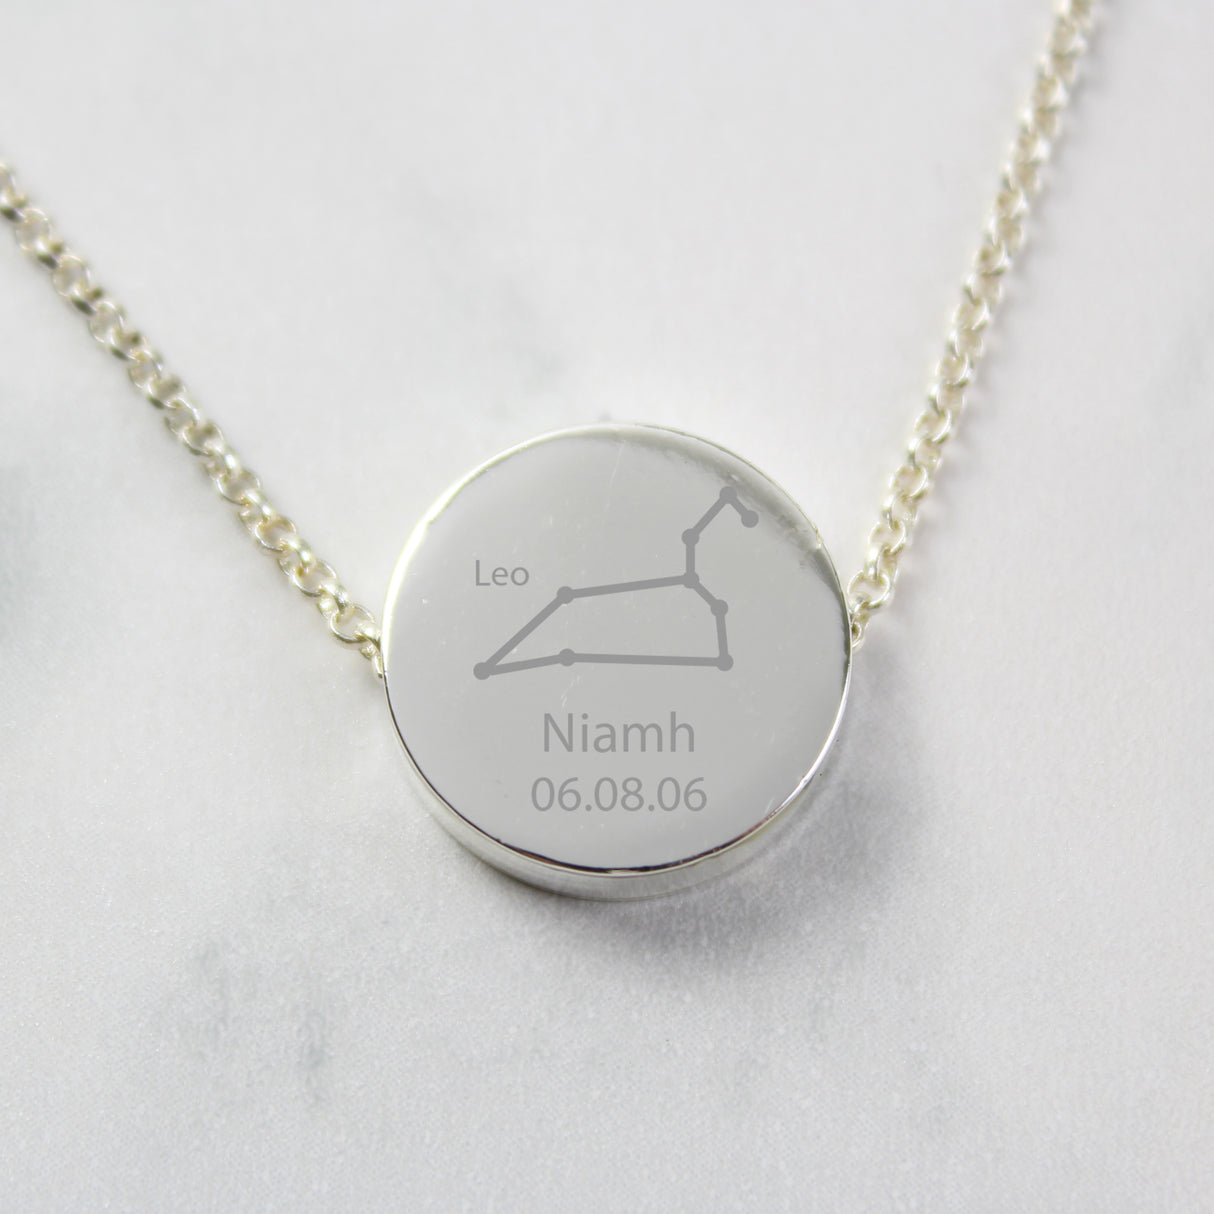 Personalised Leo Zodiac Star Sign Necklace (Jul 23rd - Aug 22nd)